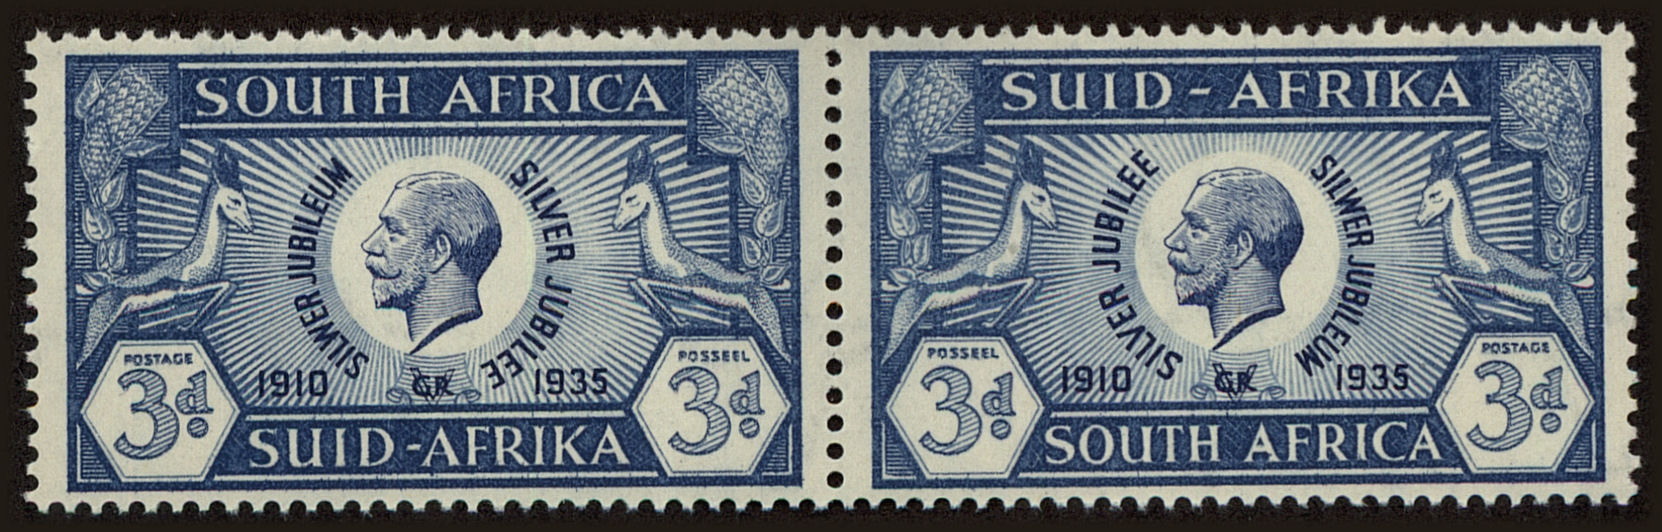 Front view of South Africa 70 collectors stamp